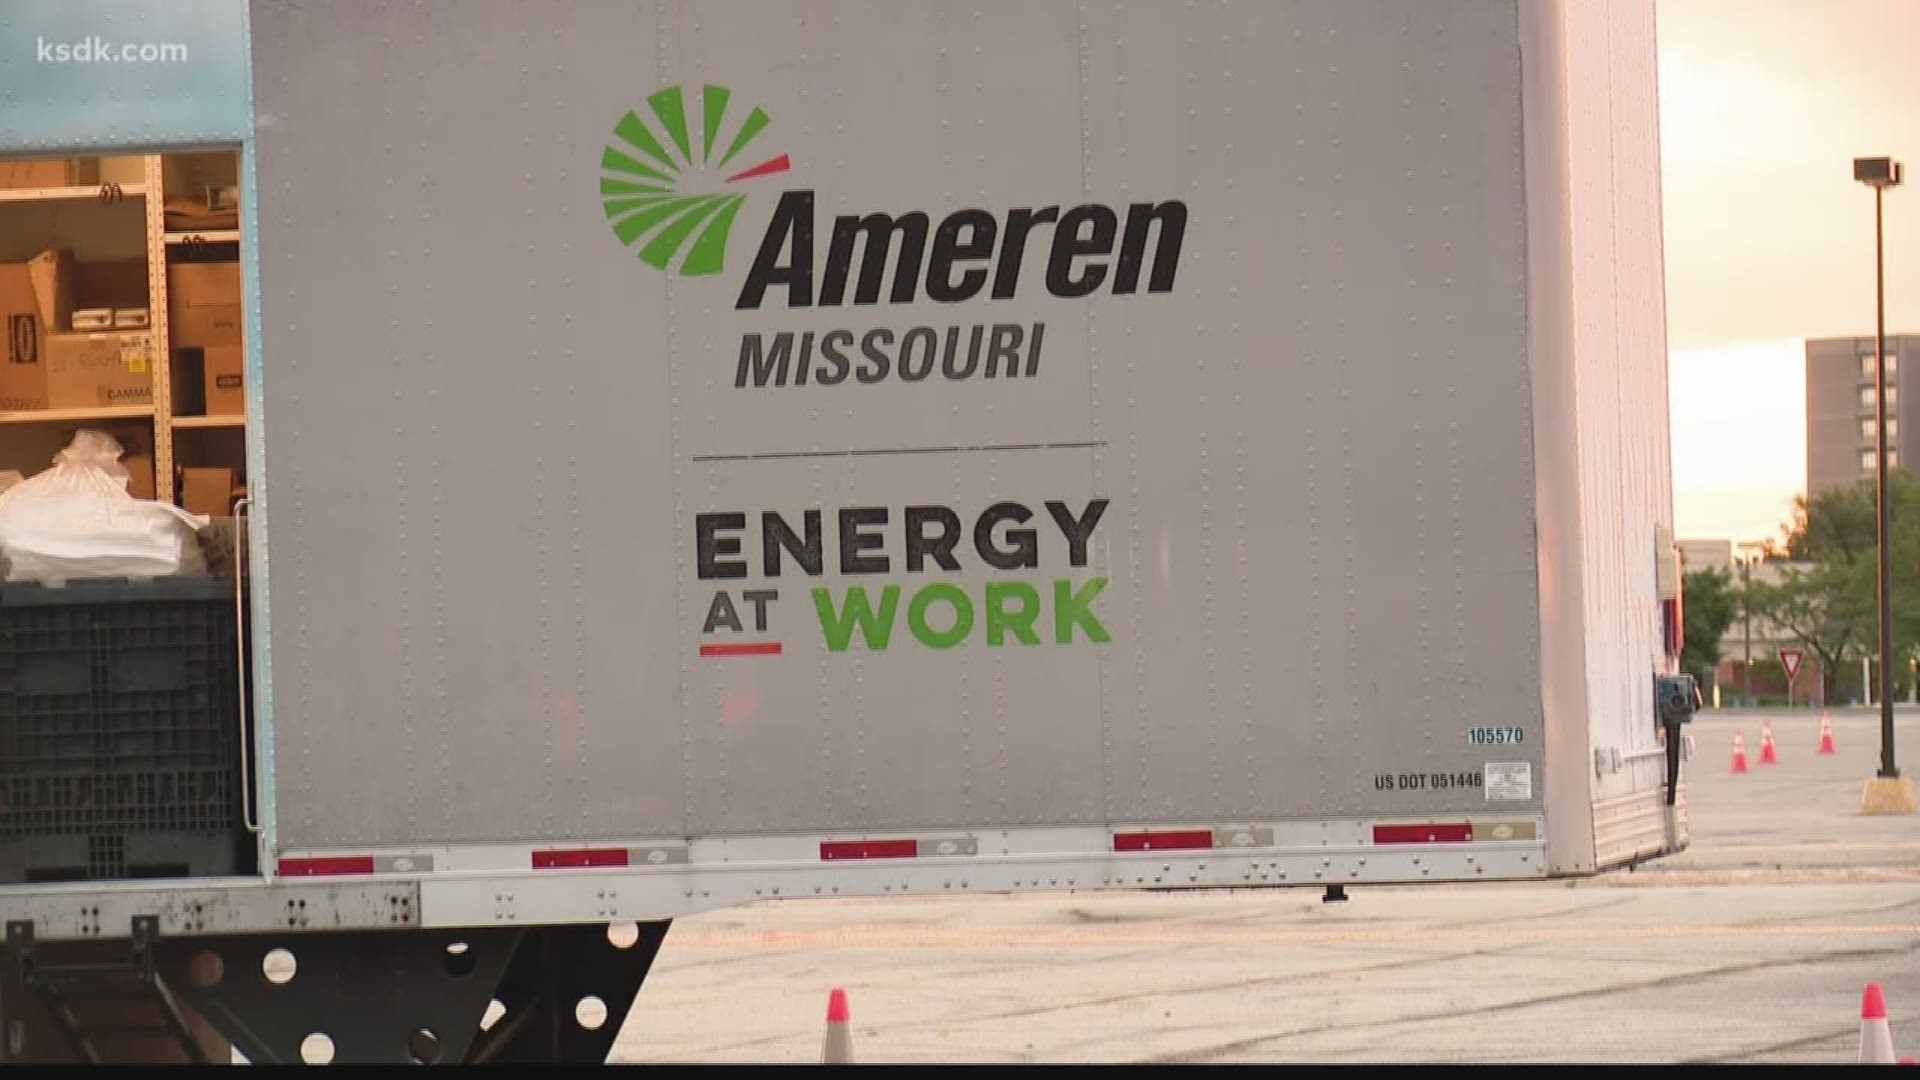 Ameren said it hopes to have everyone's power back on later Thursday night.